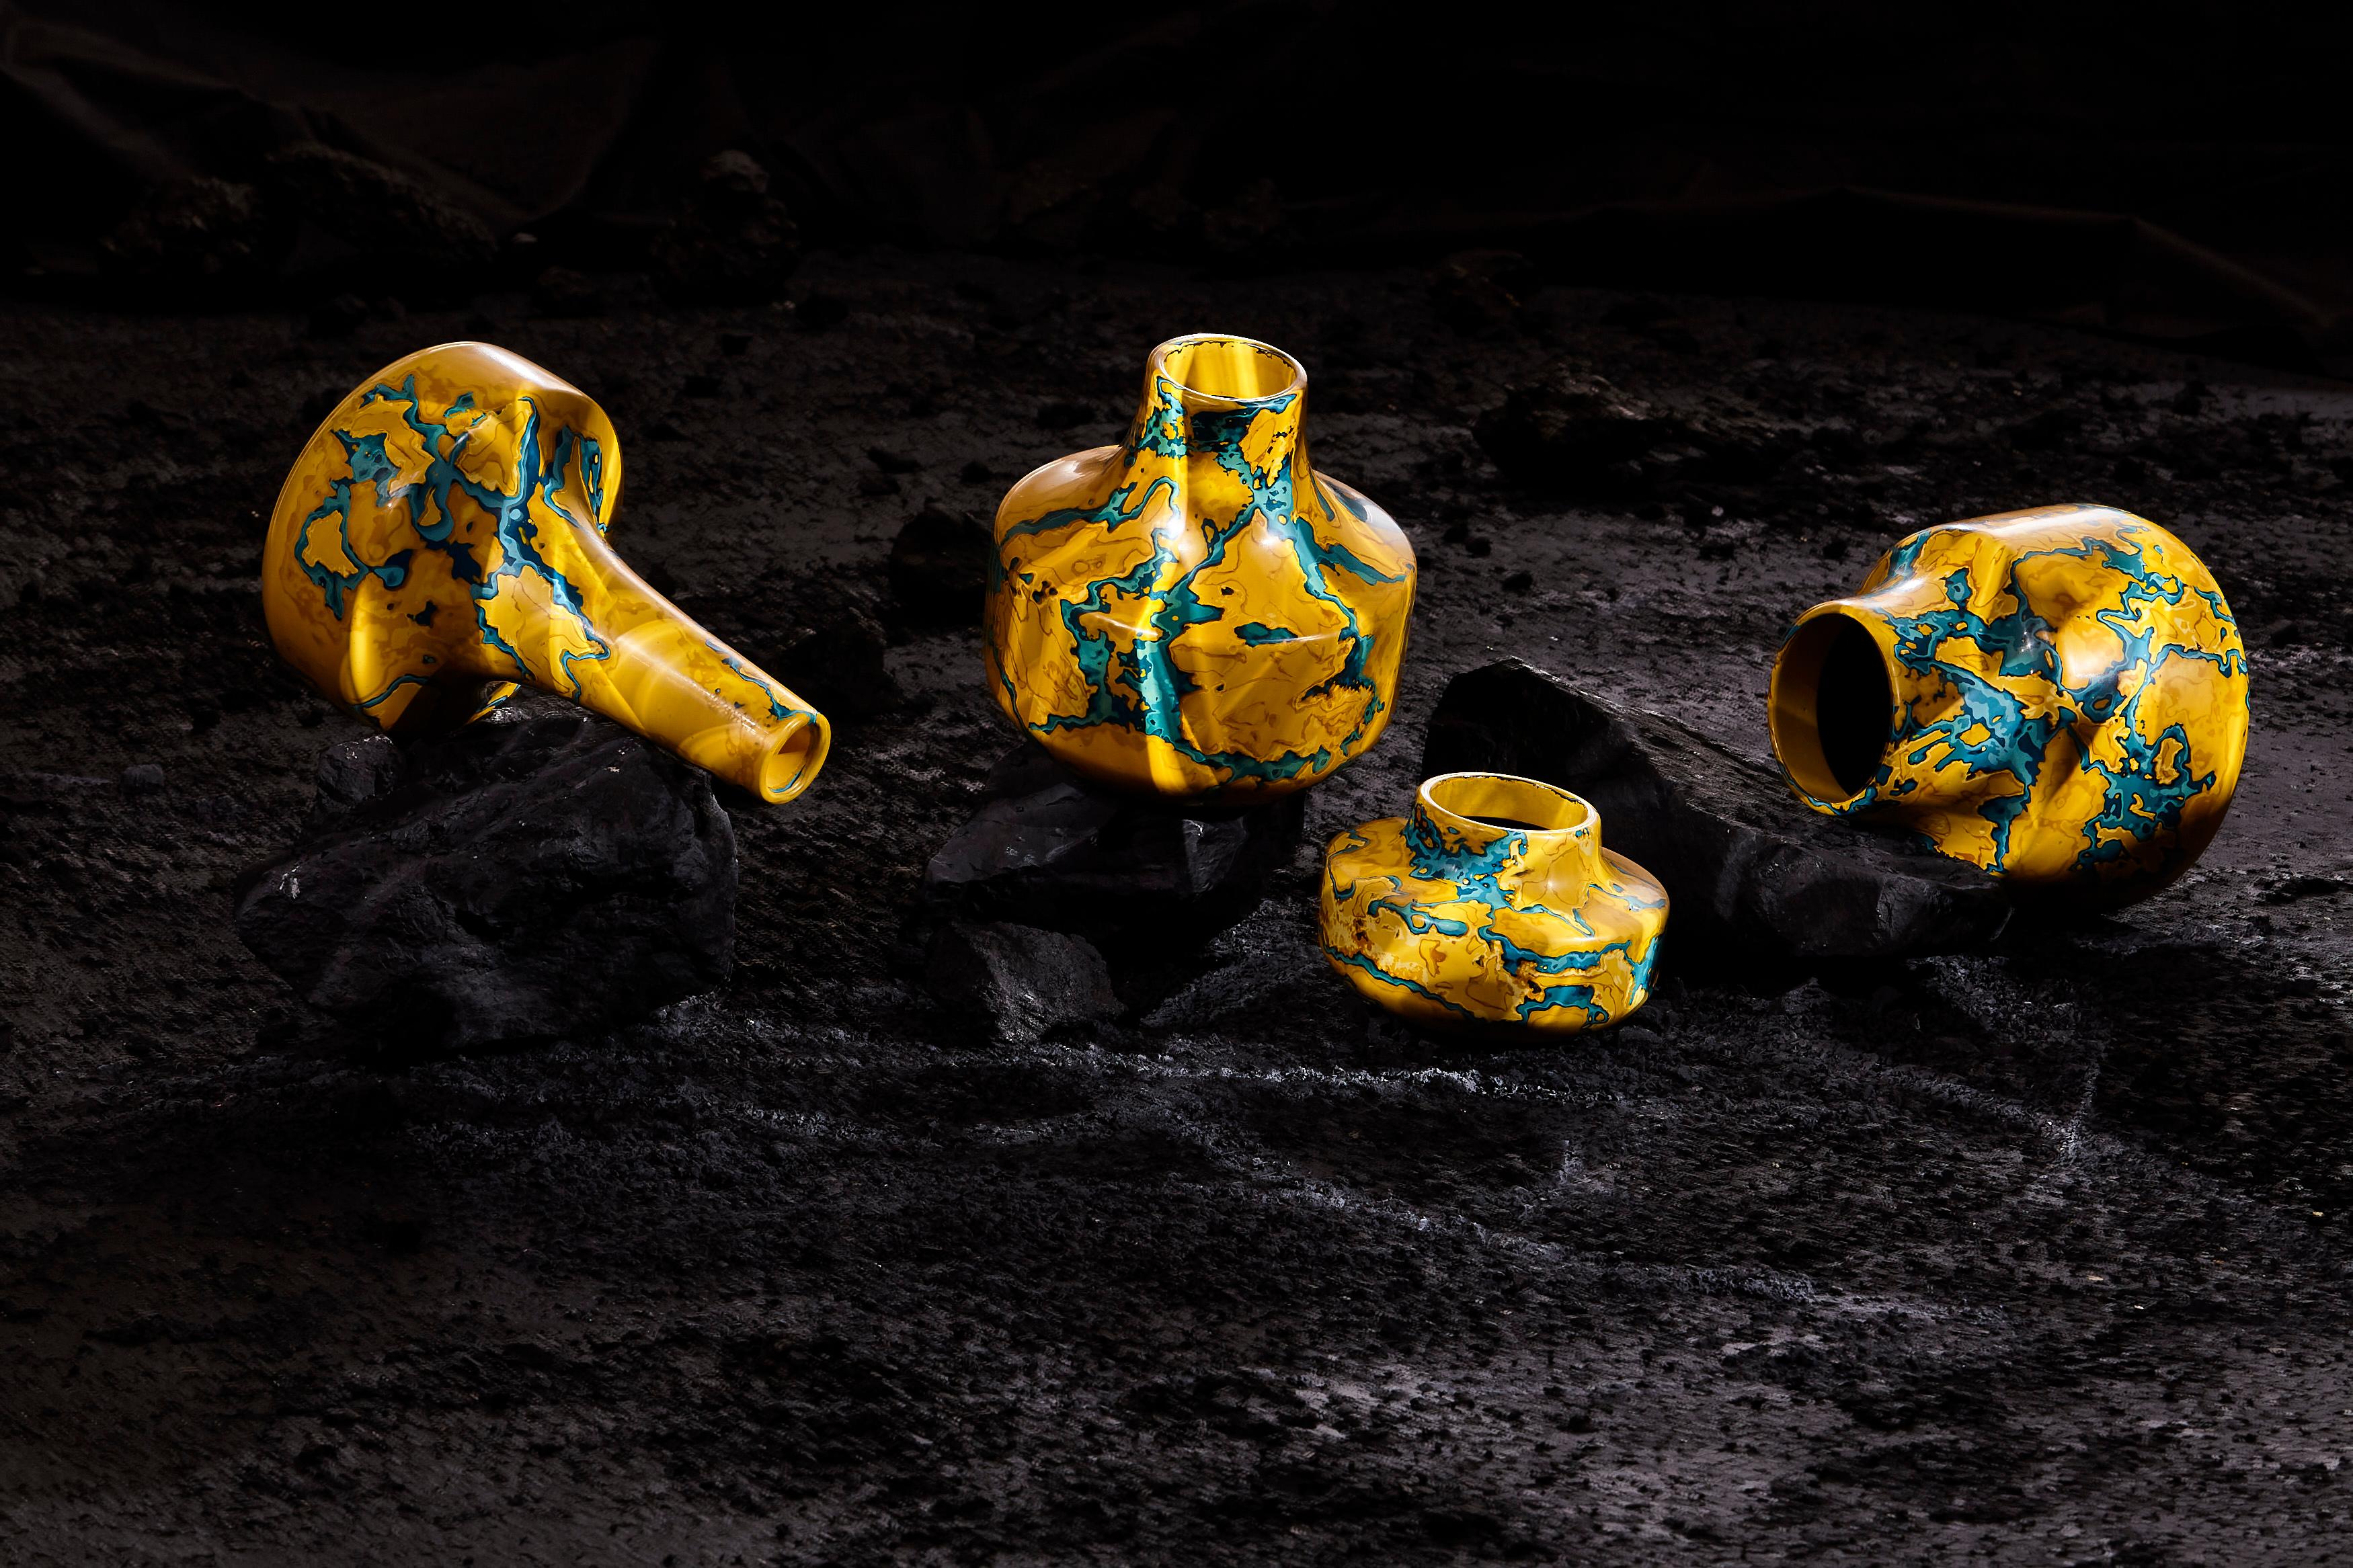 Contemporary Ming Stone, set of four yellow & blue Jesmonite vessels /vases by Nic Parnell For Sale